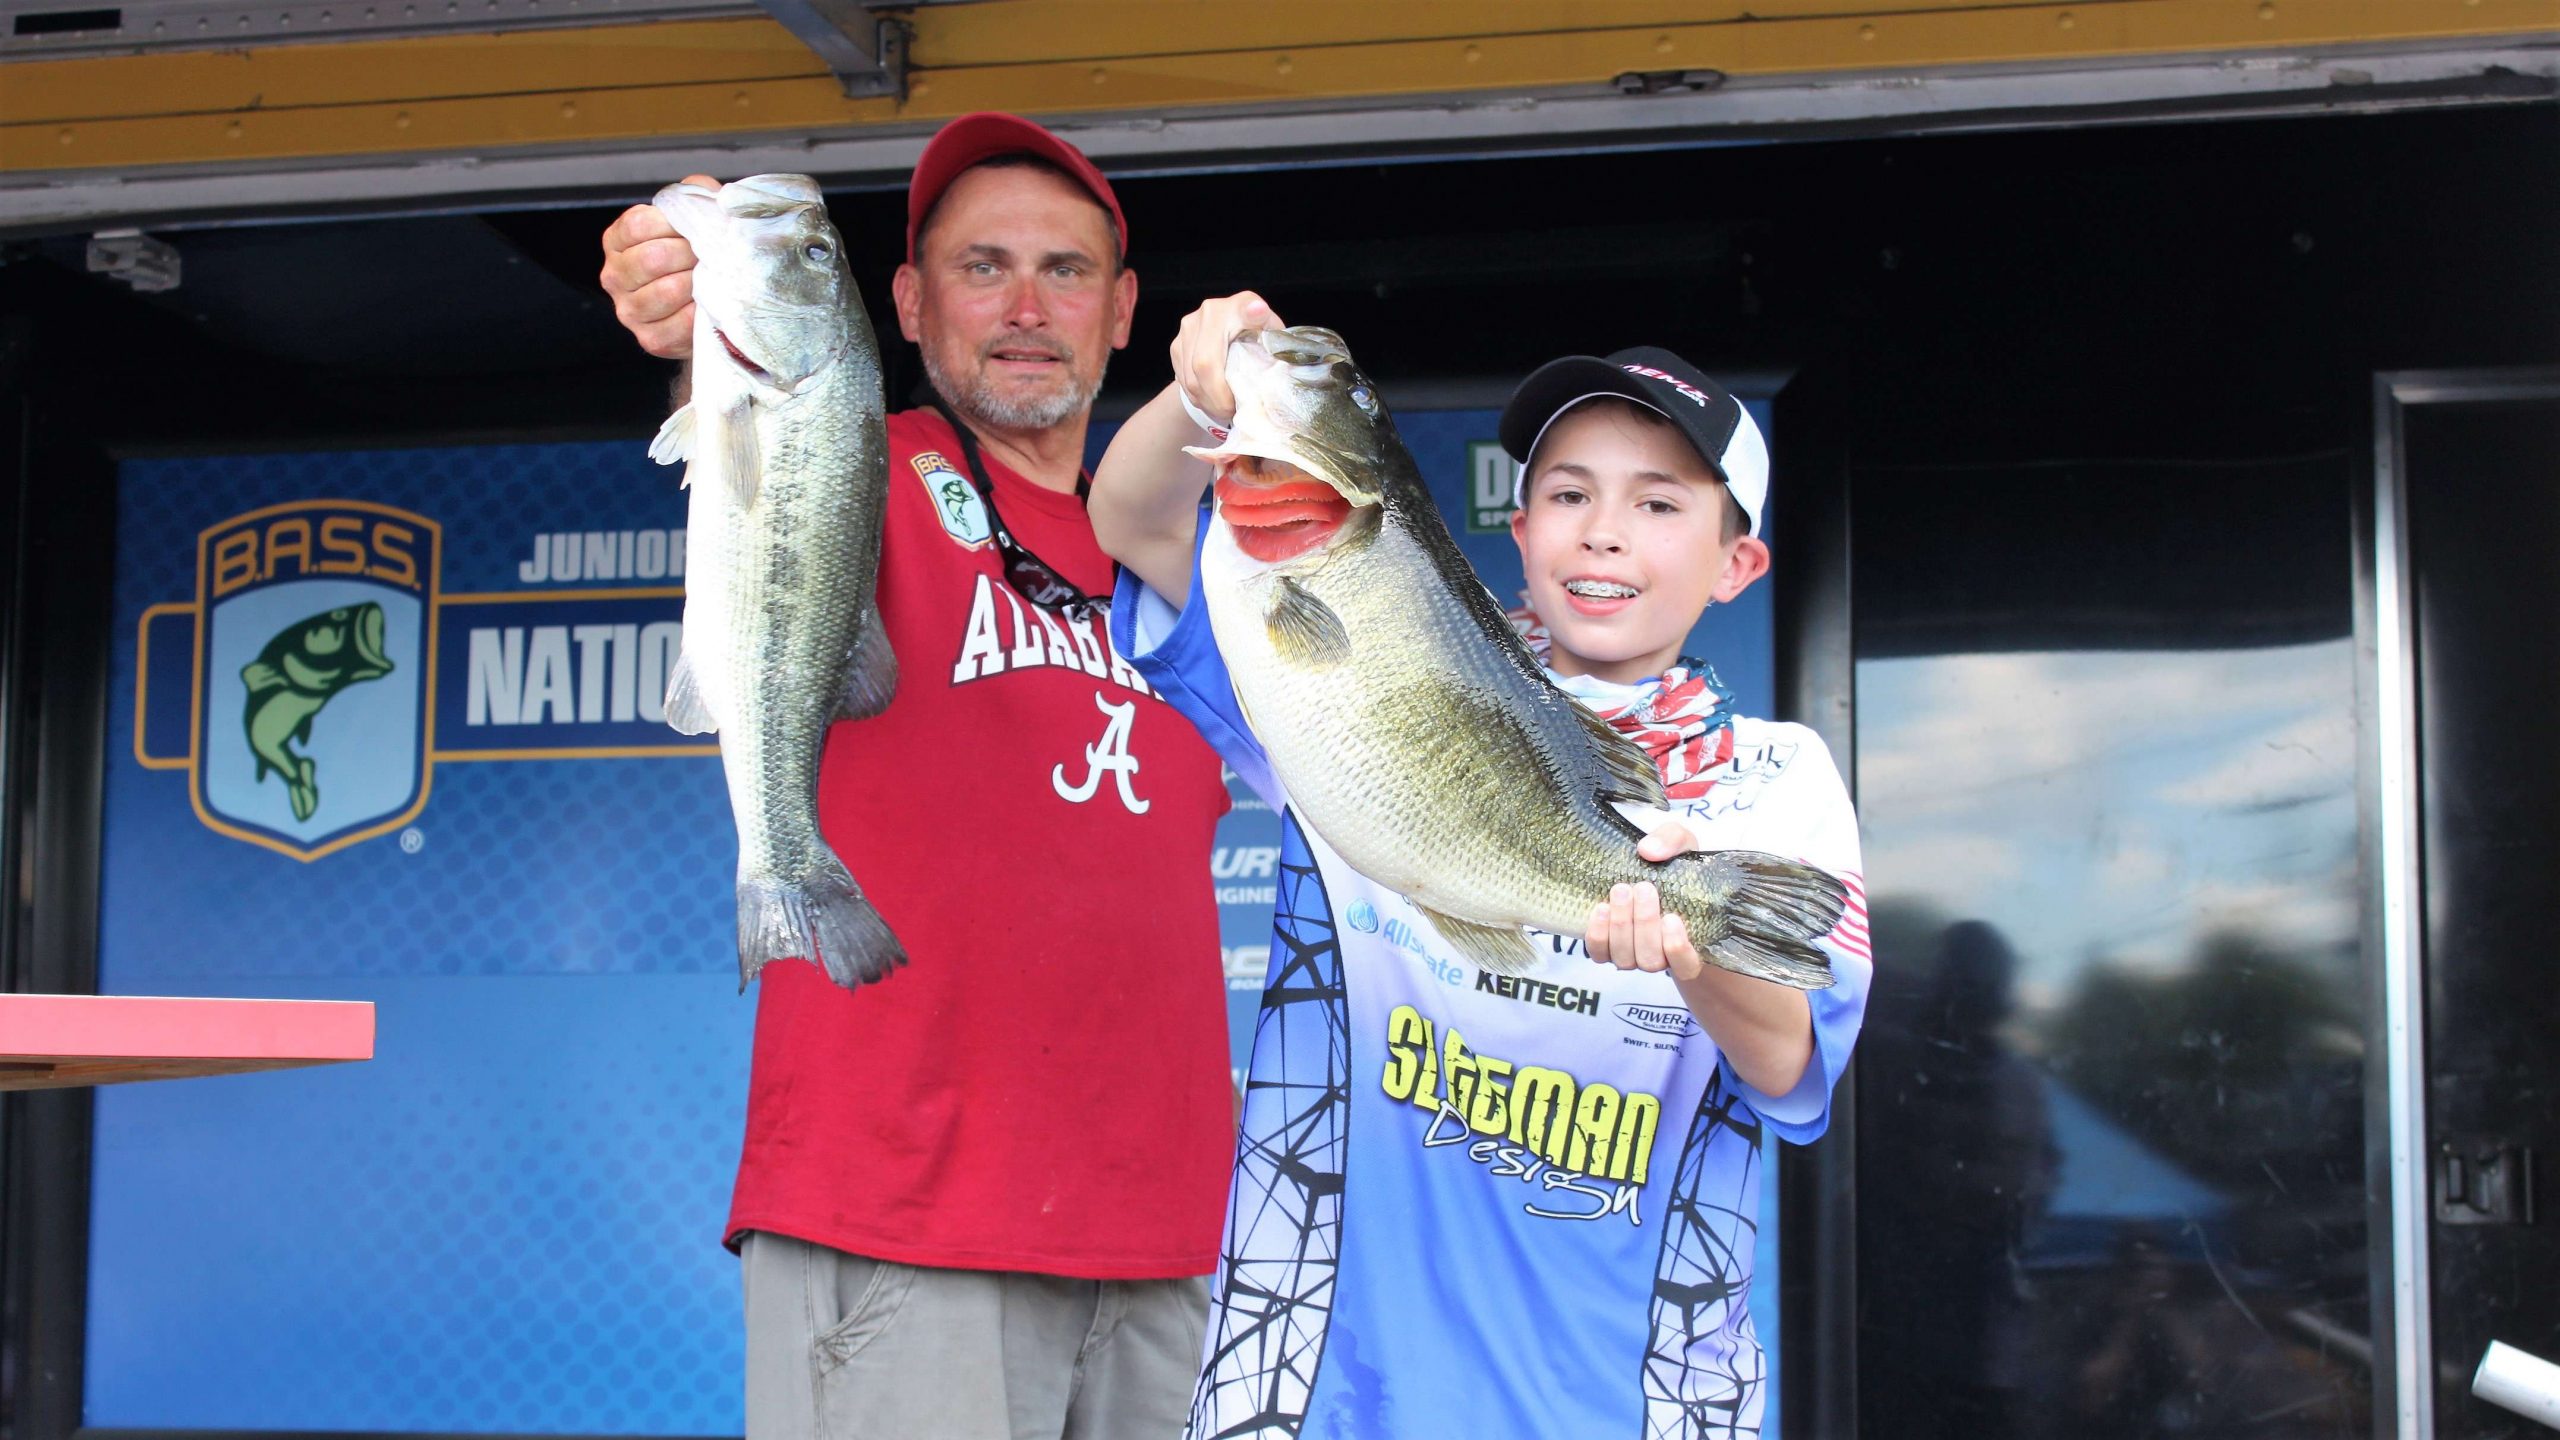  Then Golubjatnikov stepped to the scales and weighed the big bass of the day â and a biggunâ it was. The 8-2 bass anchored a five-bass limit that weighed 15-13 and put him in the lead on Day 1. His dad Ken is boat captain/coach and heâs holding a 4-pound plus bass that Rein also caught on Tuesday. Golubjatnikov is fishing solo this week; the only angler in the field to do so.
